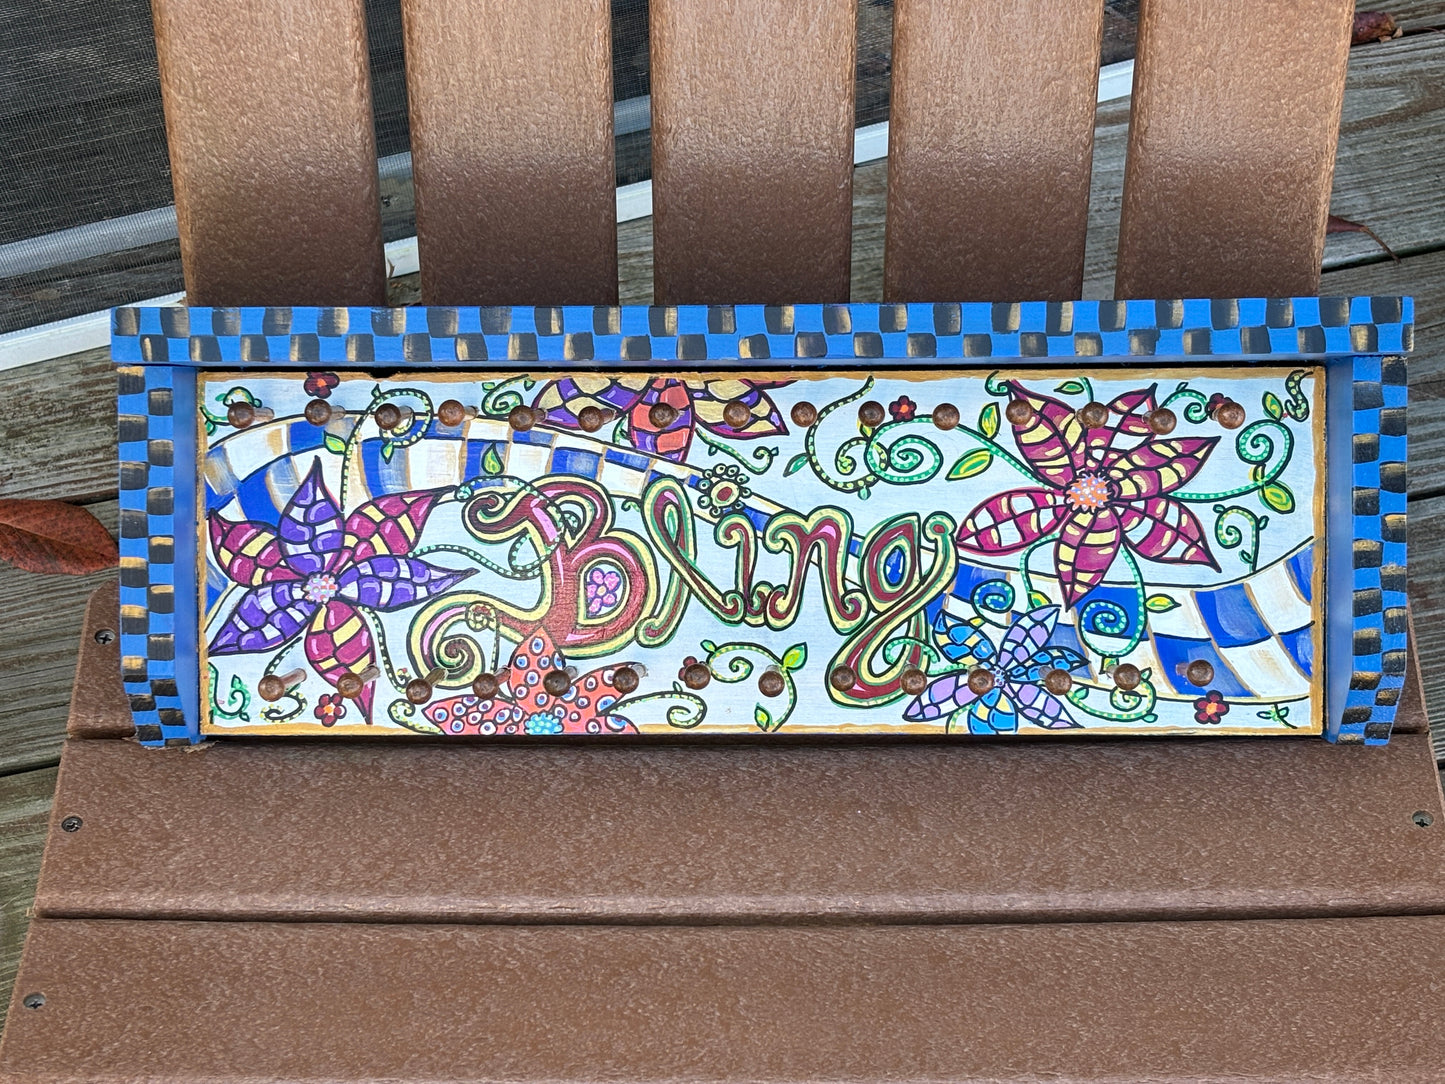 Up-cyled Sign to Jewelry Hanger, Hand Painted, Bohemian, Blue and Multi Color BLING Signage